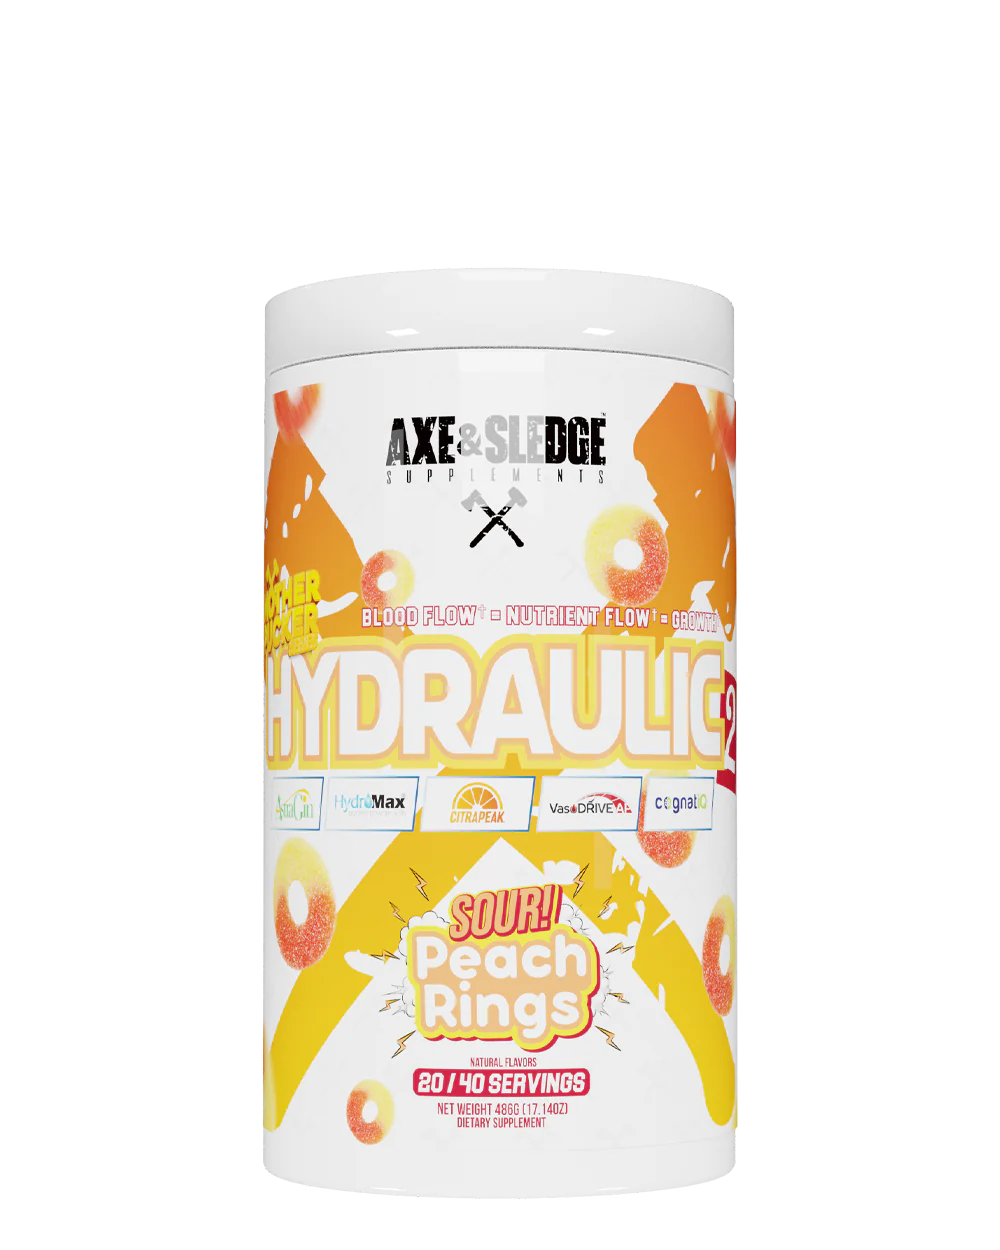 Hydraulic V2 by Axe and Sledge